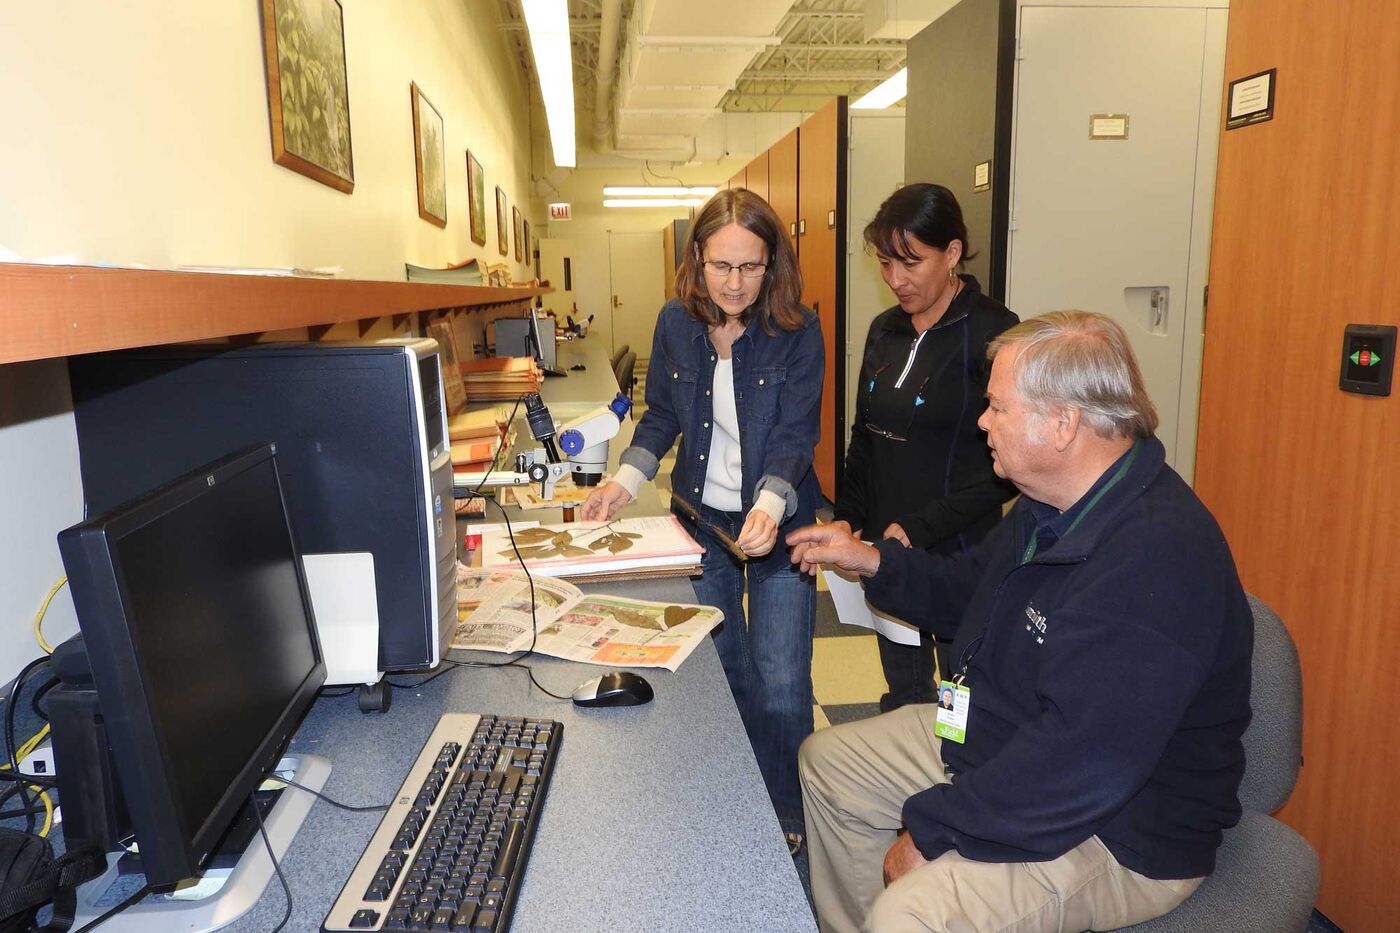 Three people look at dried plant specimens at a desk in a collections area.